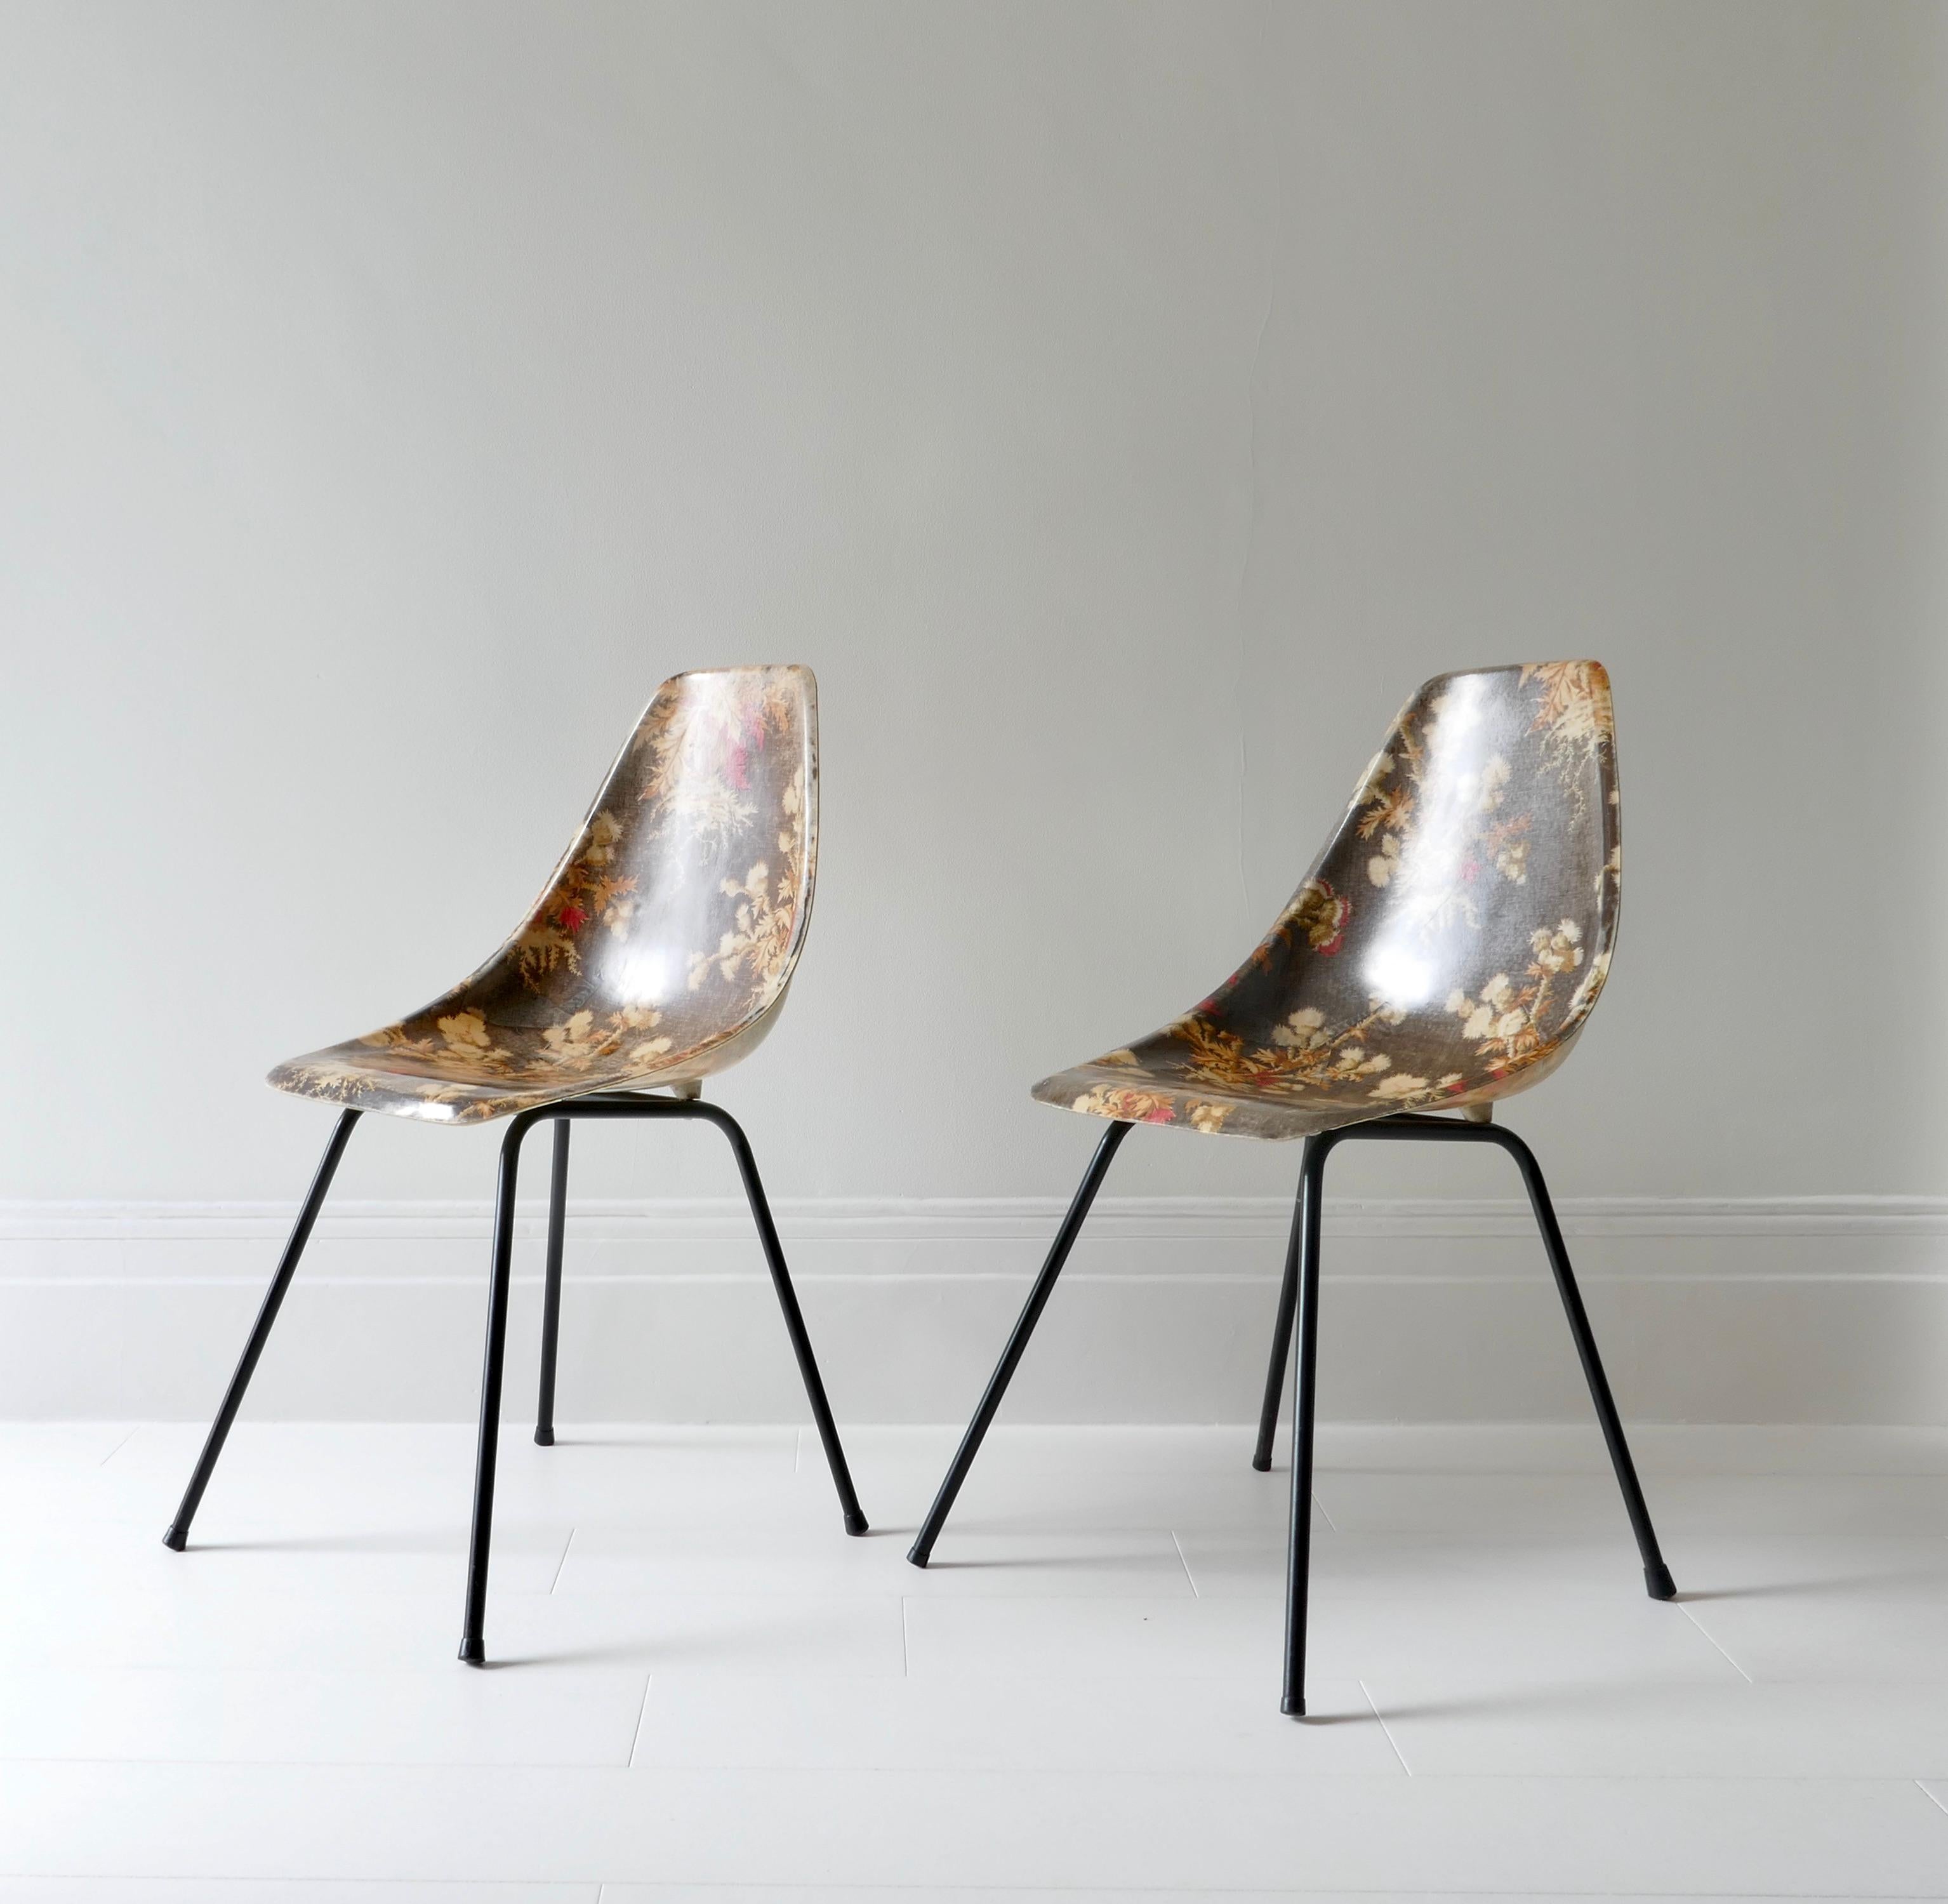 French Pair of Fibreglass Side Chairs by Rene Jean Caillette, France 1950s For Sale